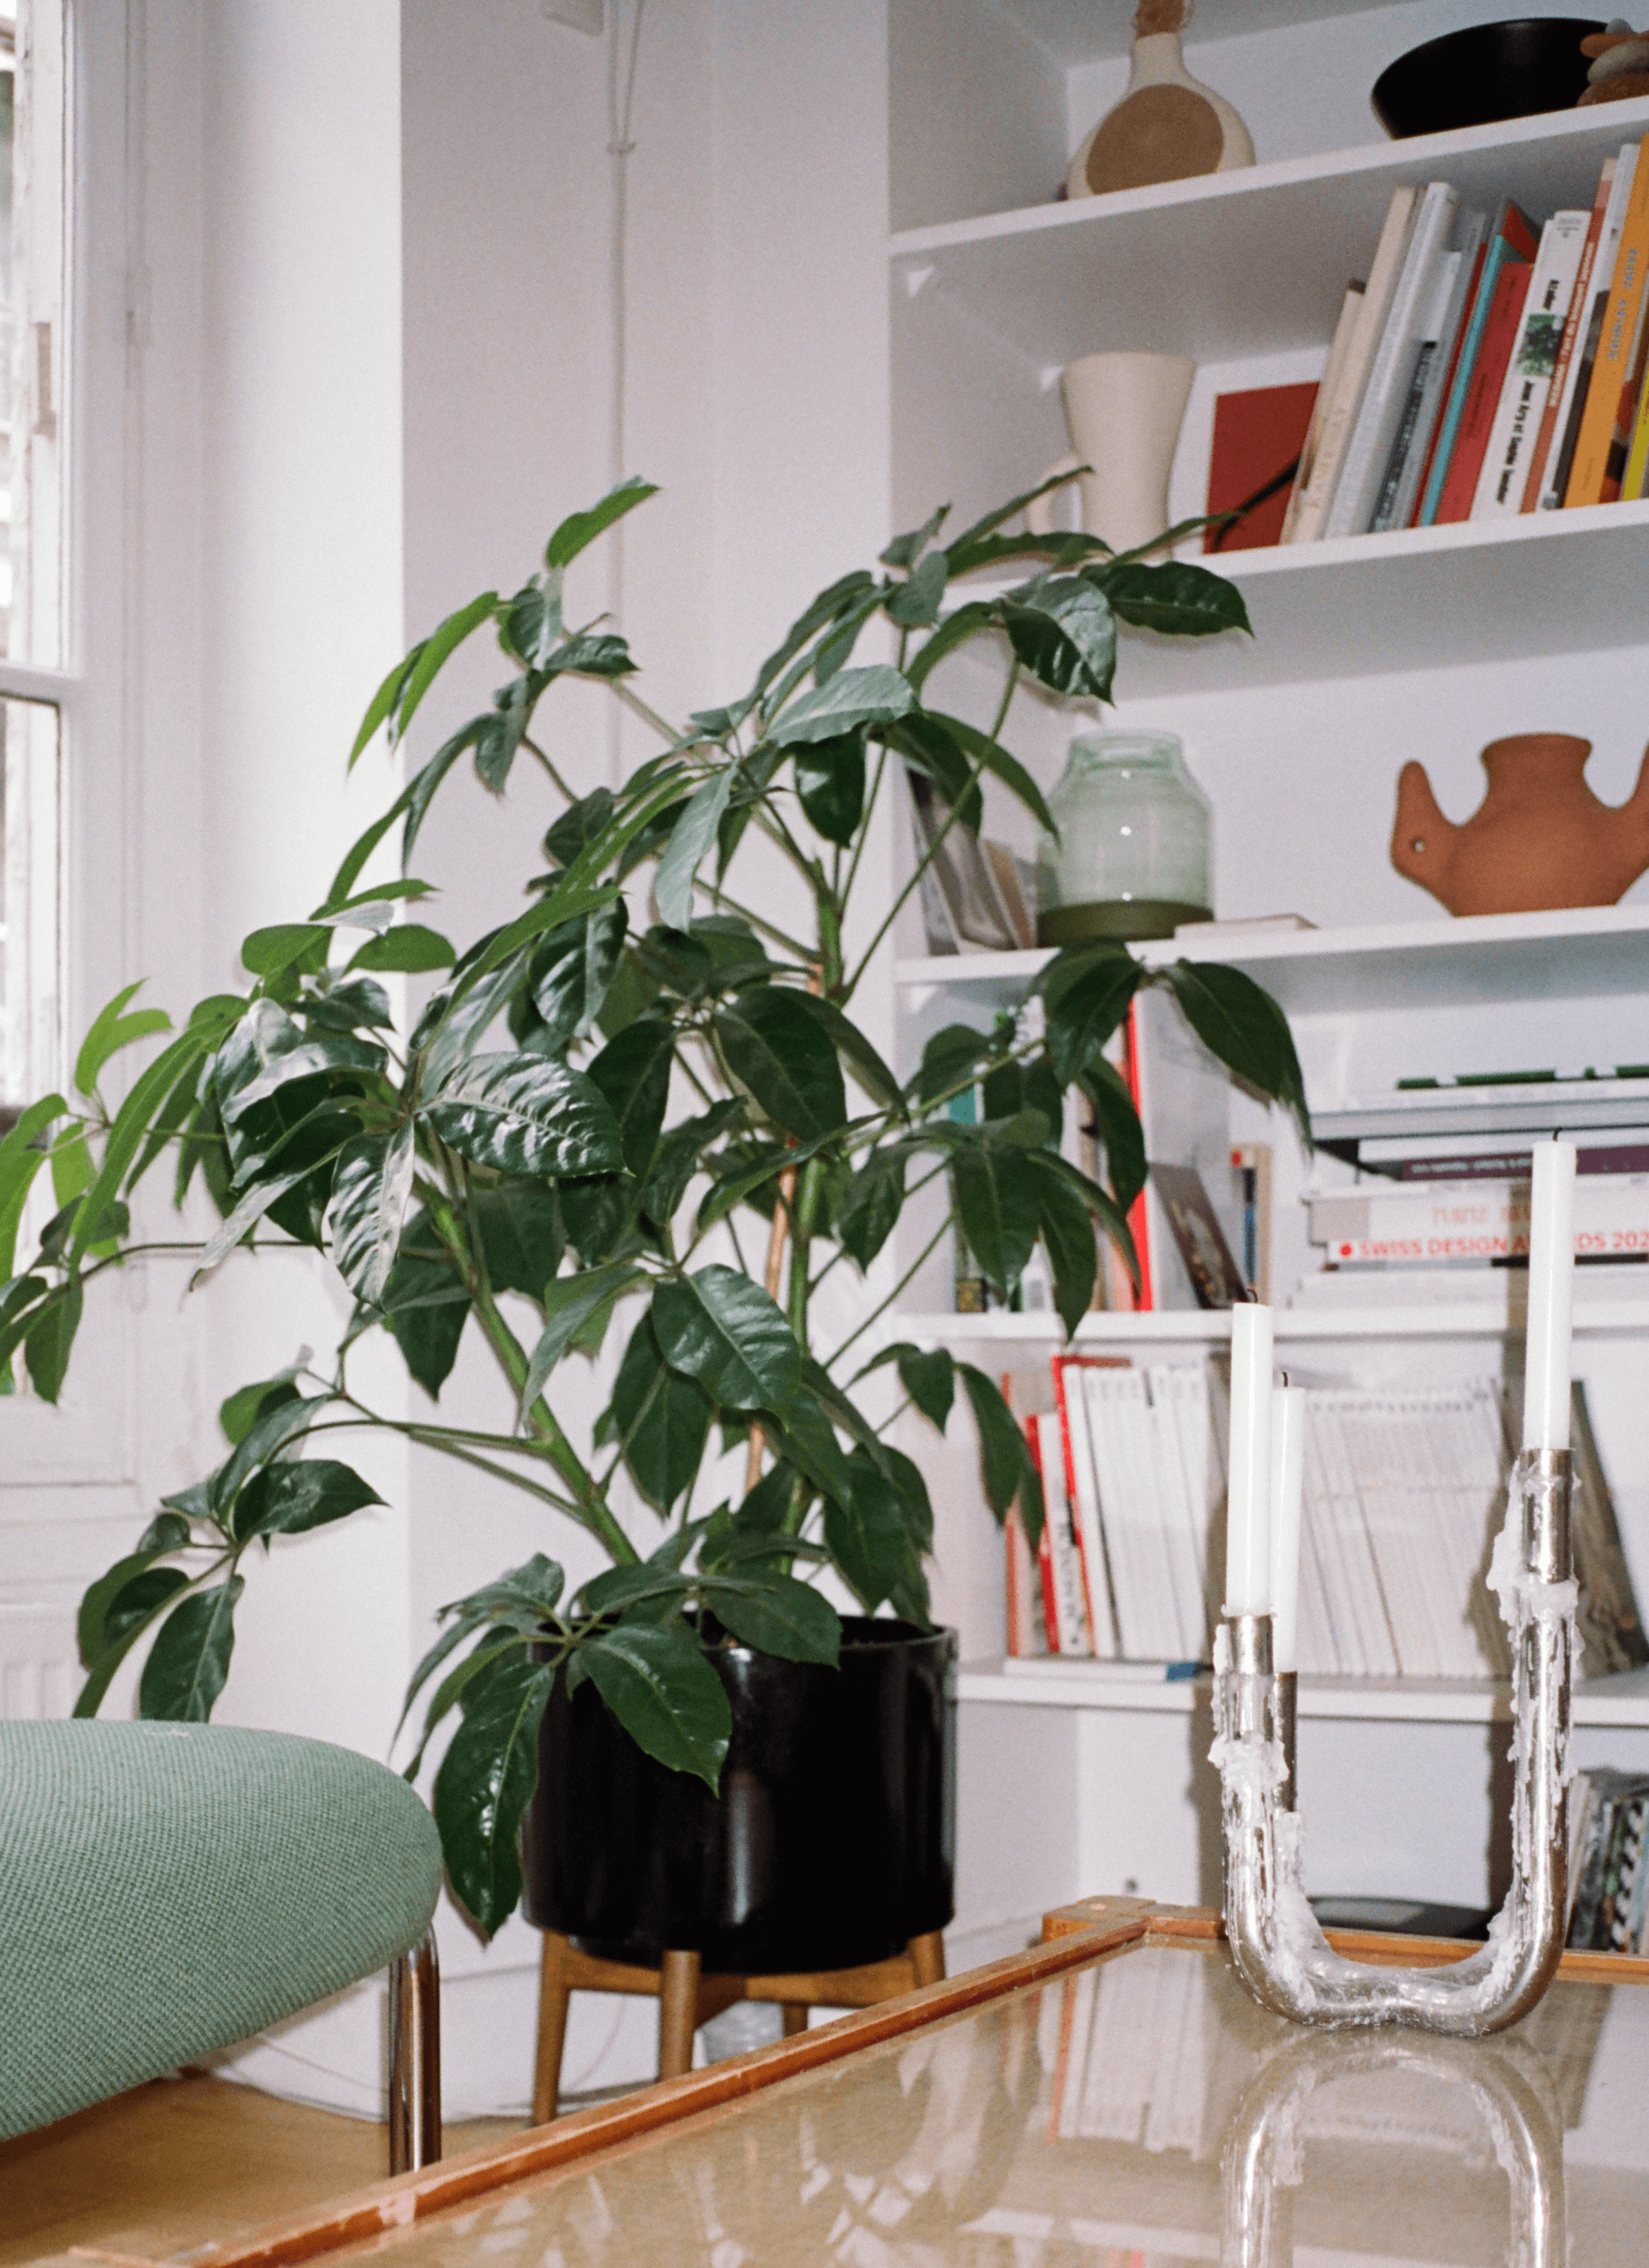 A plant grows in a black pot in a corner of the room next to a chair. And there’s a shelf of books with some vessels as decorations - a silver-like candle holder on the table.